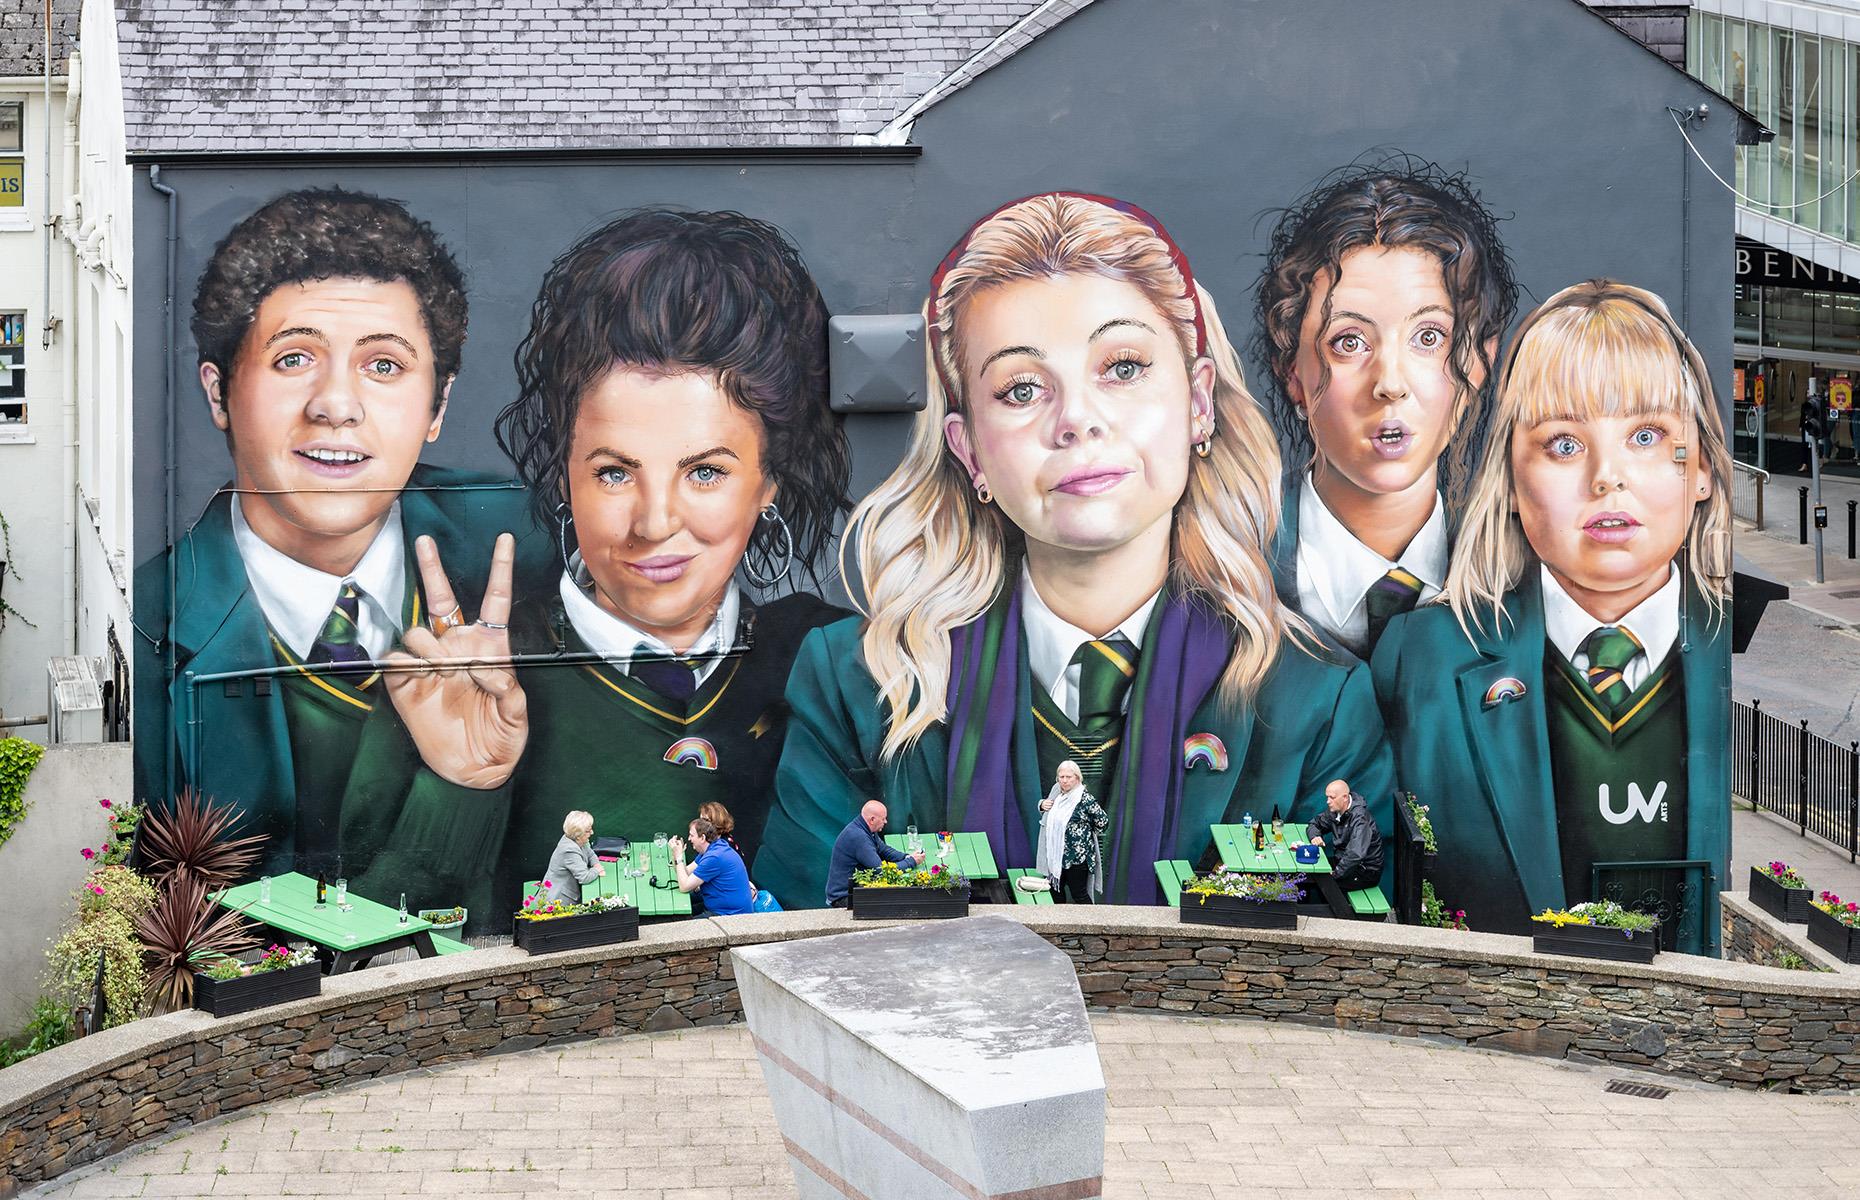 <p>In fact, there are plenty of opportunities for <em>Derry Girls </em>fans to immerse themselves in the world of these iconic characters while visiting the city. Perhaps the biggest attraction is the Derry Girls mural, painted by UV Arts in 2019 to honour the show’s impact on the city.</p>  <p>The mural is a fantastic photo opp for Derry Girls fans of all ages. </p>